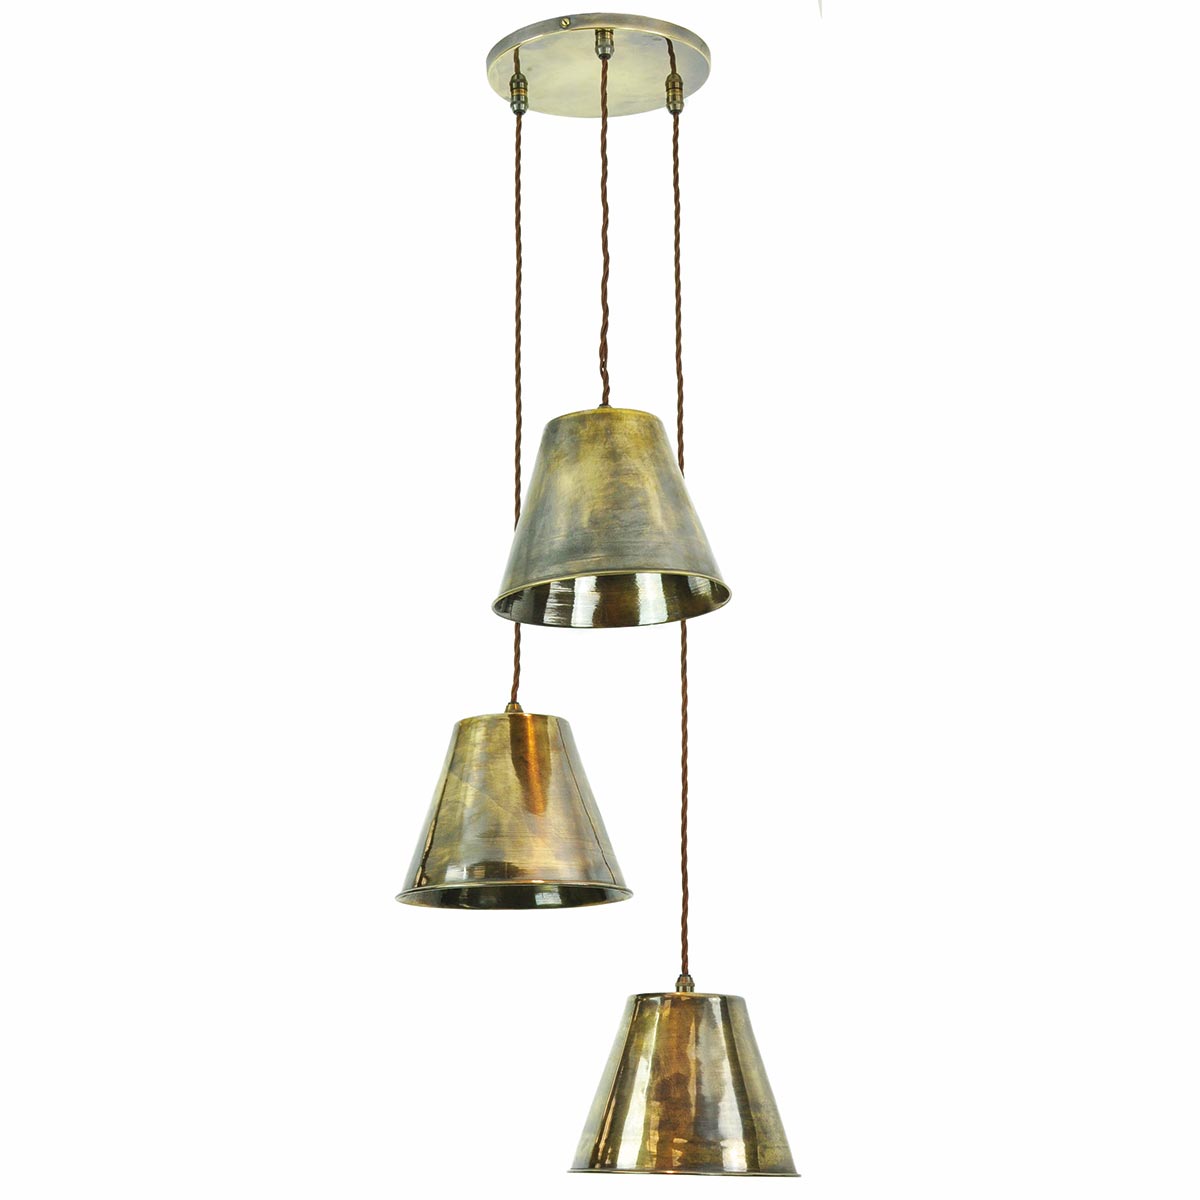 Map Room Nautical 3 Light Cluster Pendant Solid Antique Brass